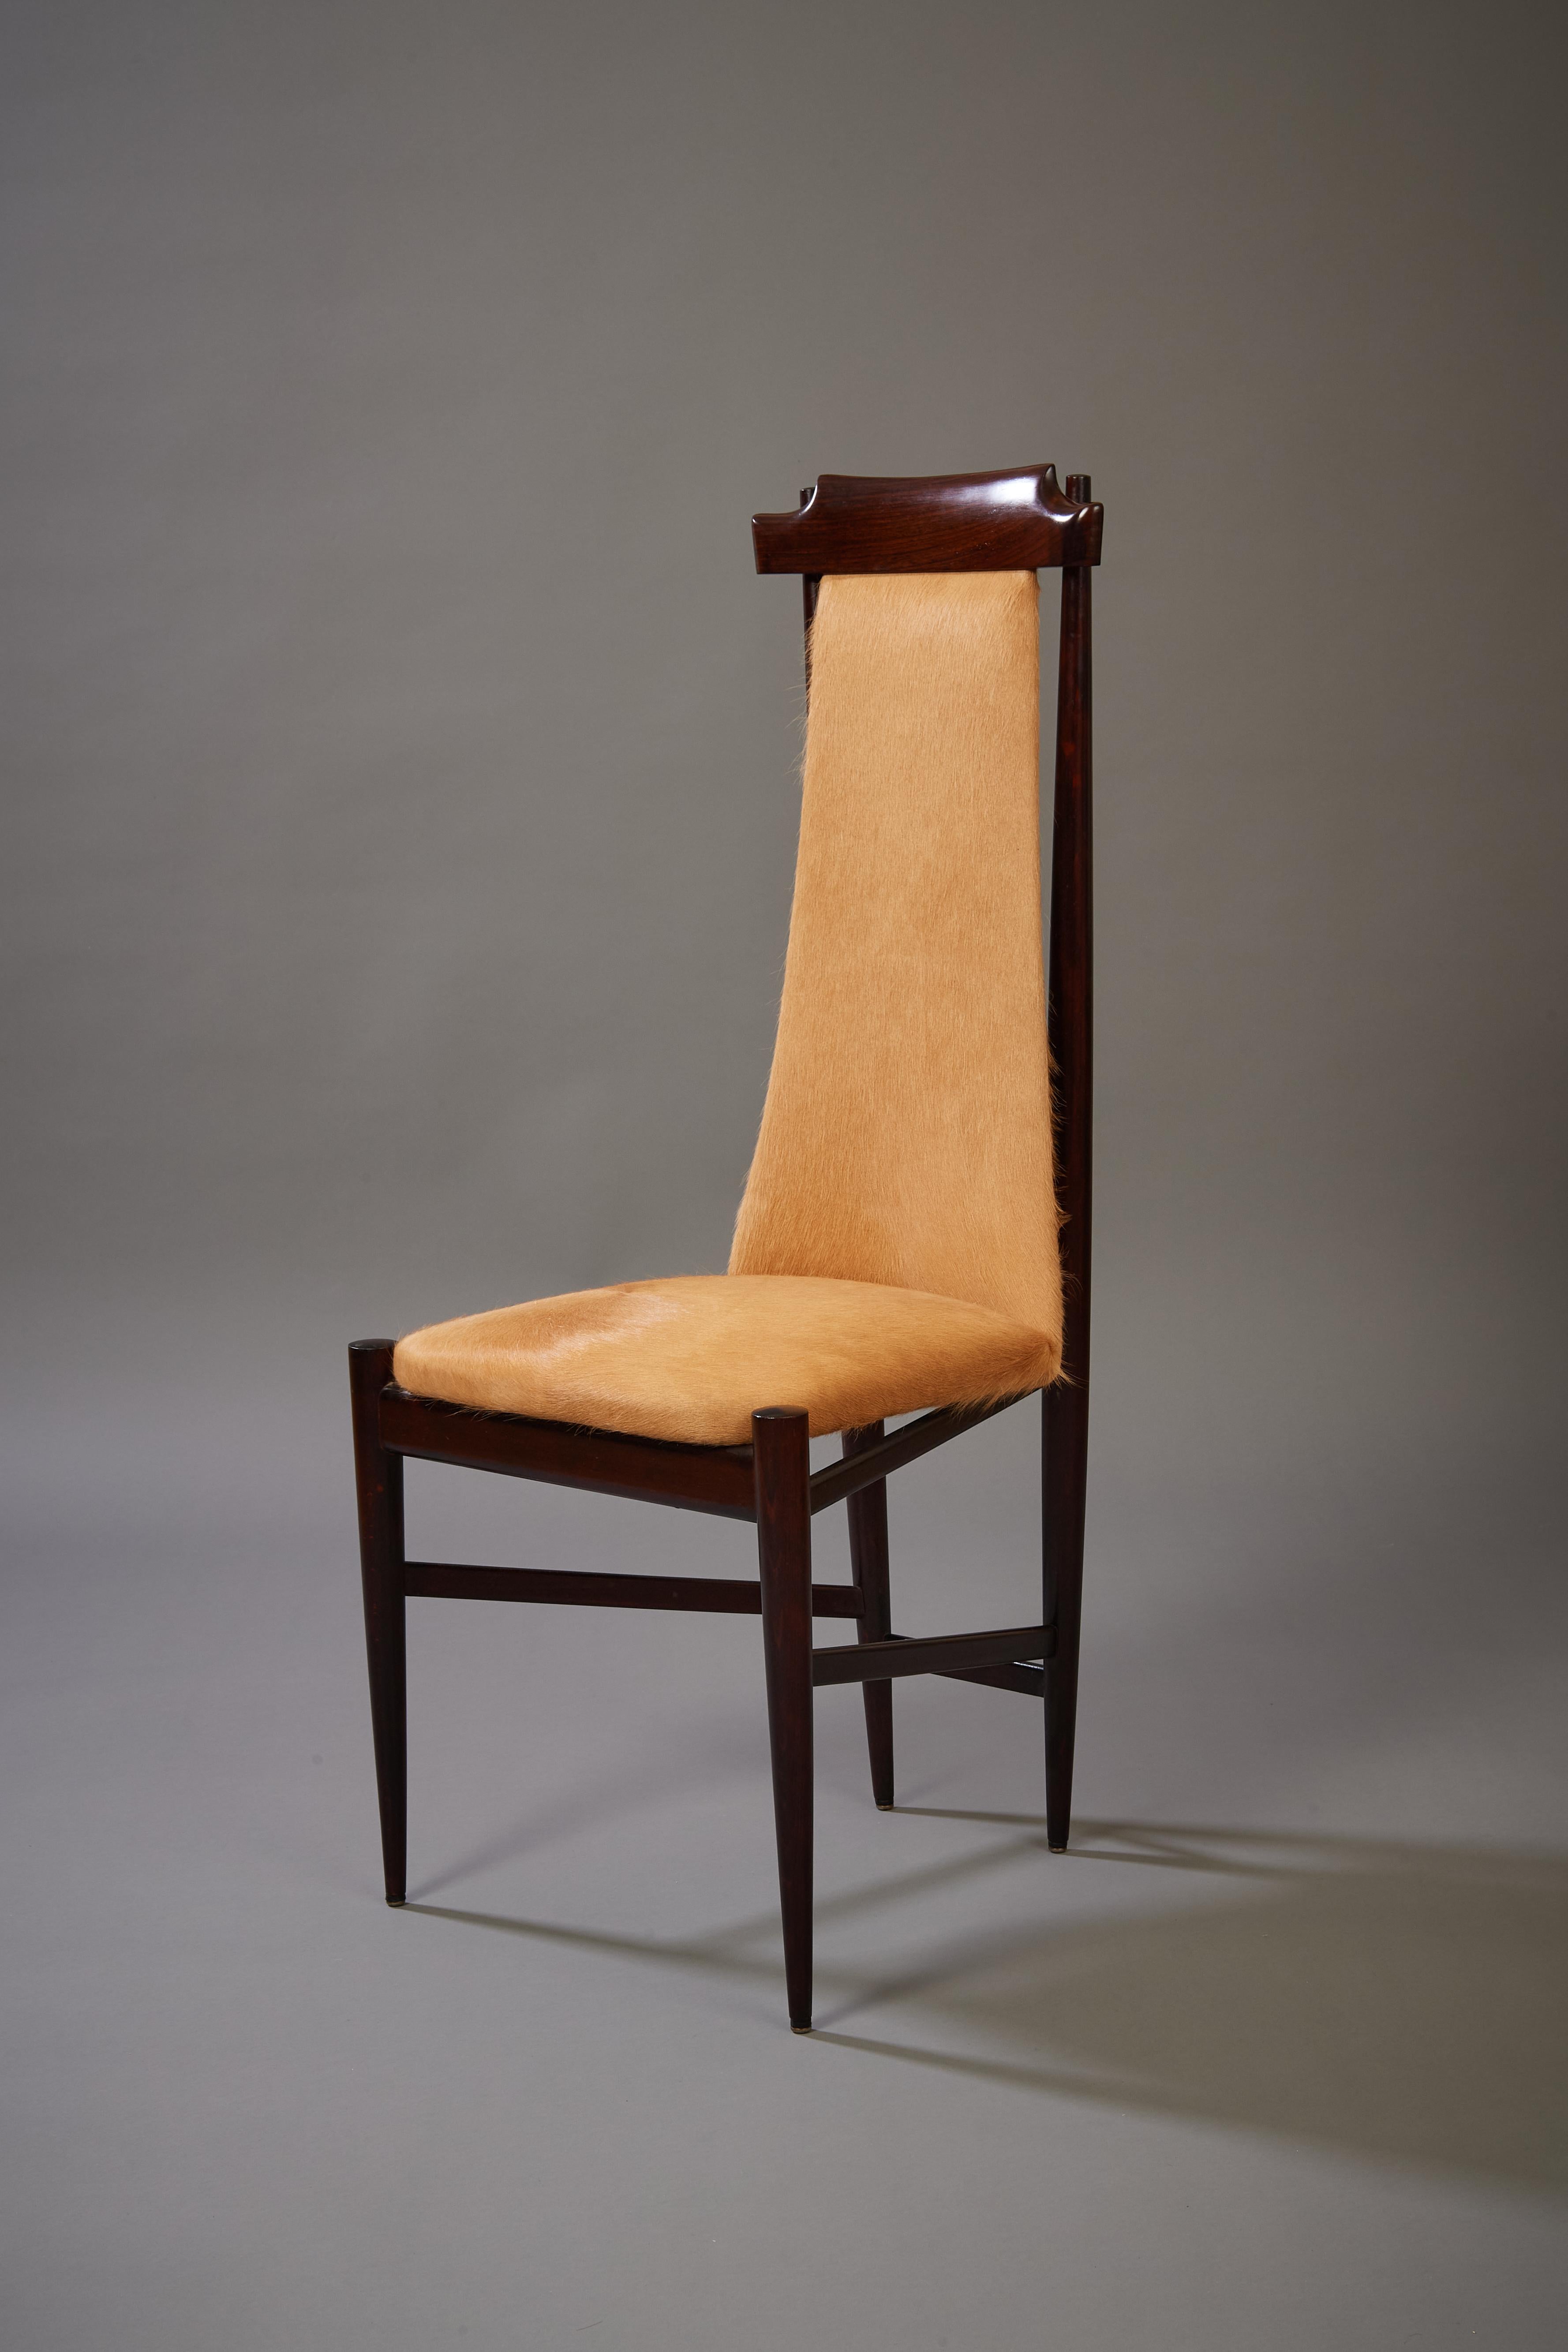 Sergio Rodrigues Six Dining Chairs in Wood and Tan Cowhide, Brazil, 1960s For Sale 7